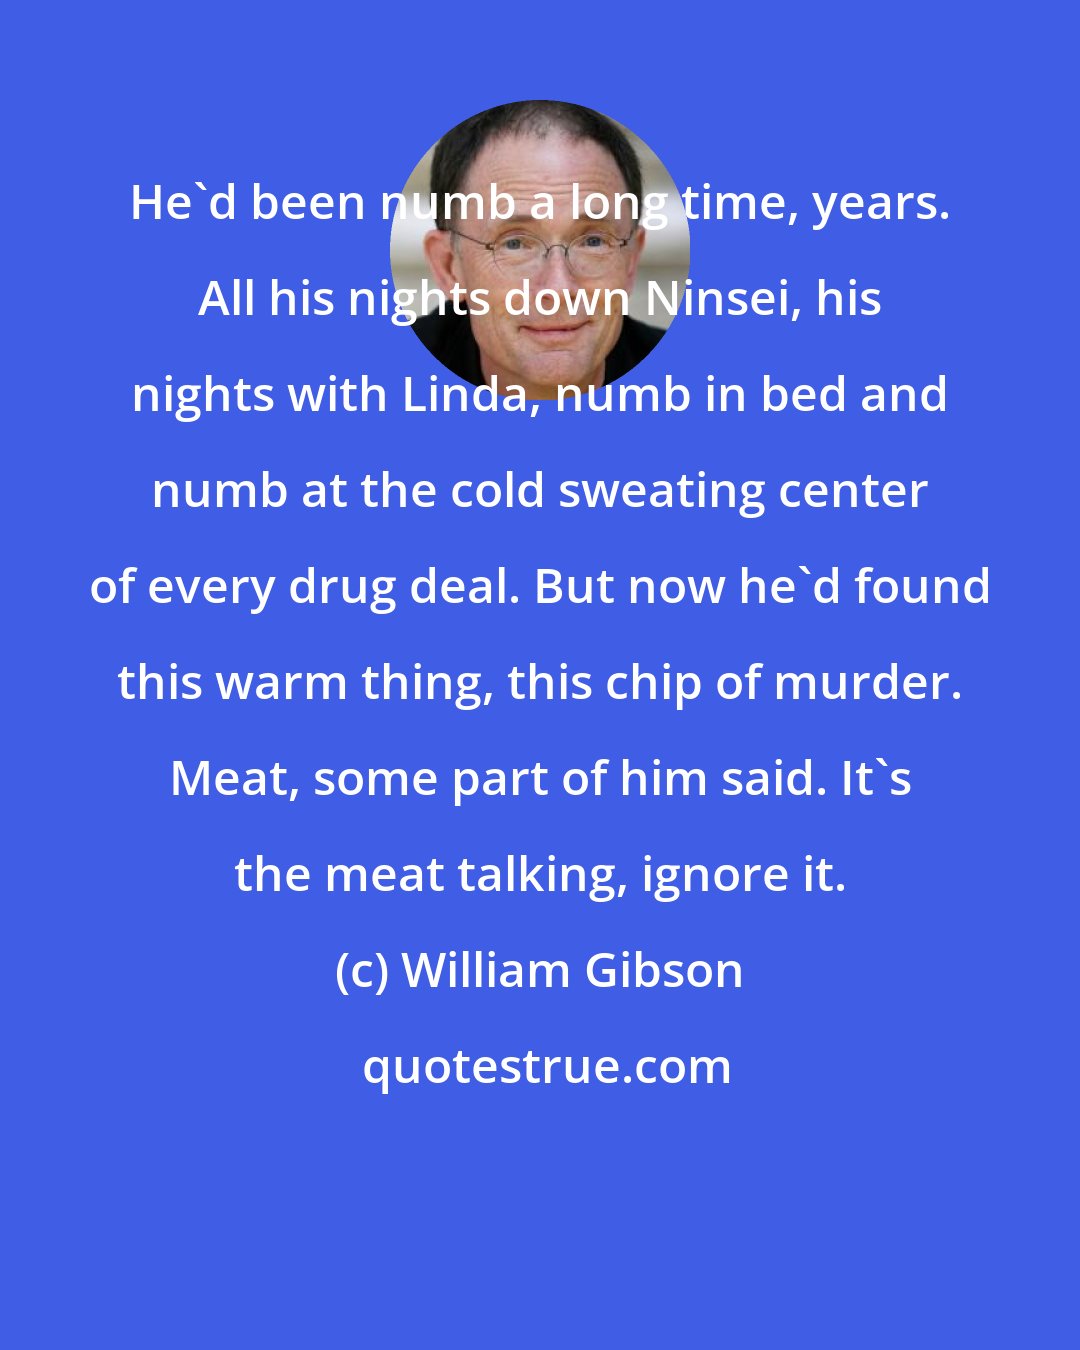 William Gibson: He'd been numb a long time, years. All his nights down Ninsei, his nights with Linda, numb in bed and numb at the cold sweating center of every drug deal. But now he'd found this warm thing, this chip of murder. Meat, some part of him said. It's the meat talking, ignore it.